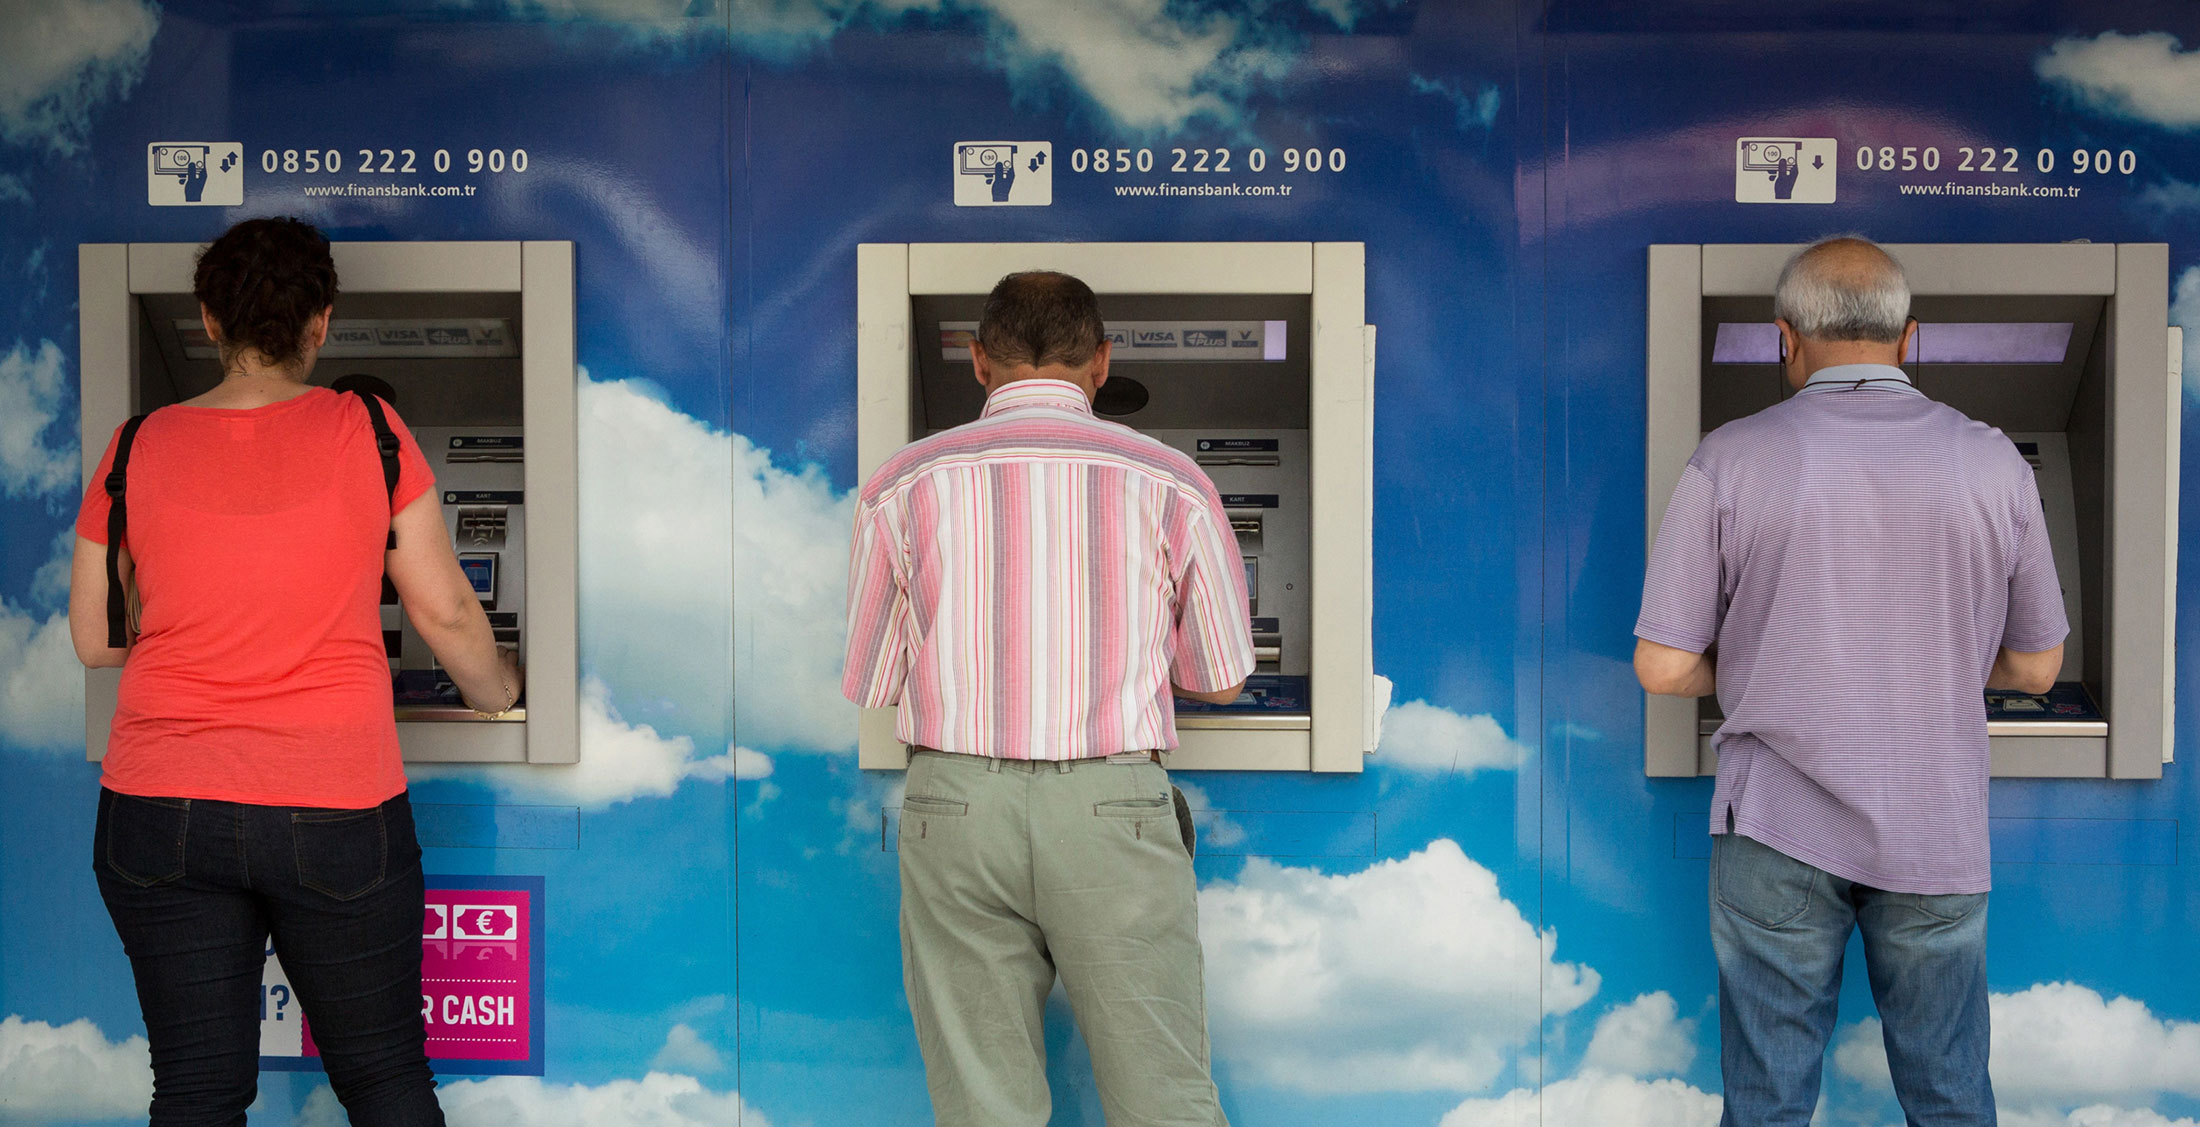 Finansbank ATMs in Istanbul.
